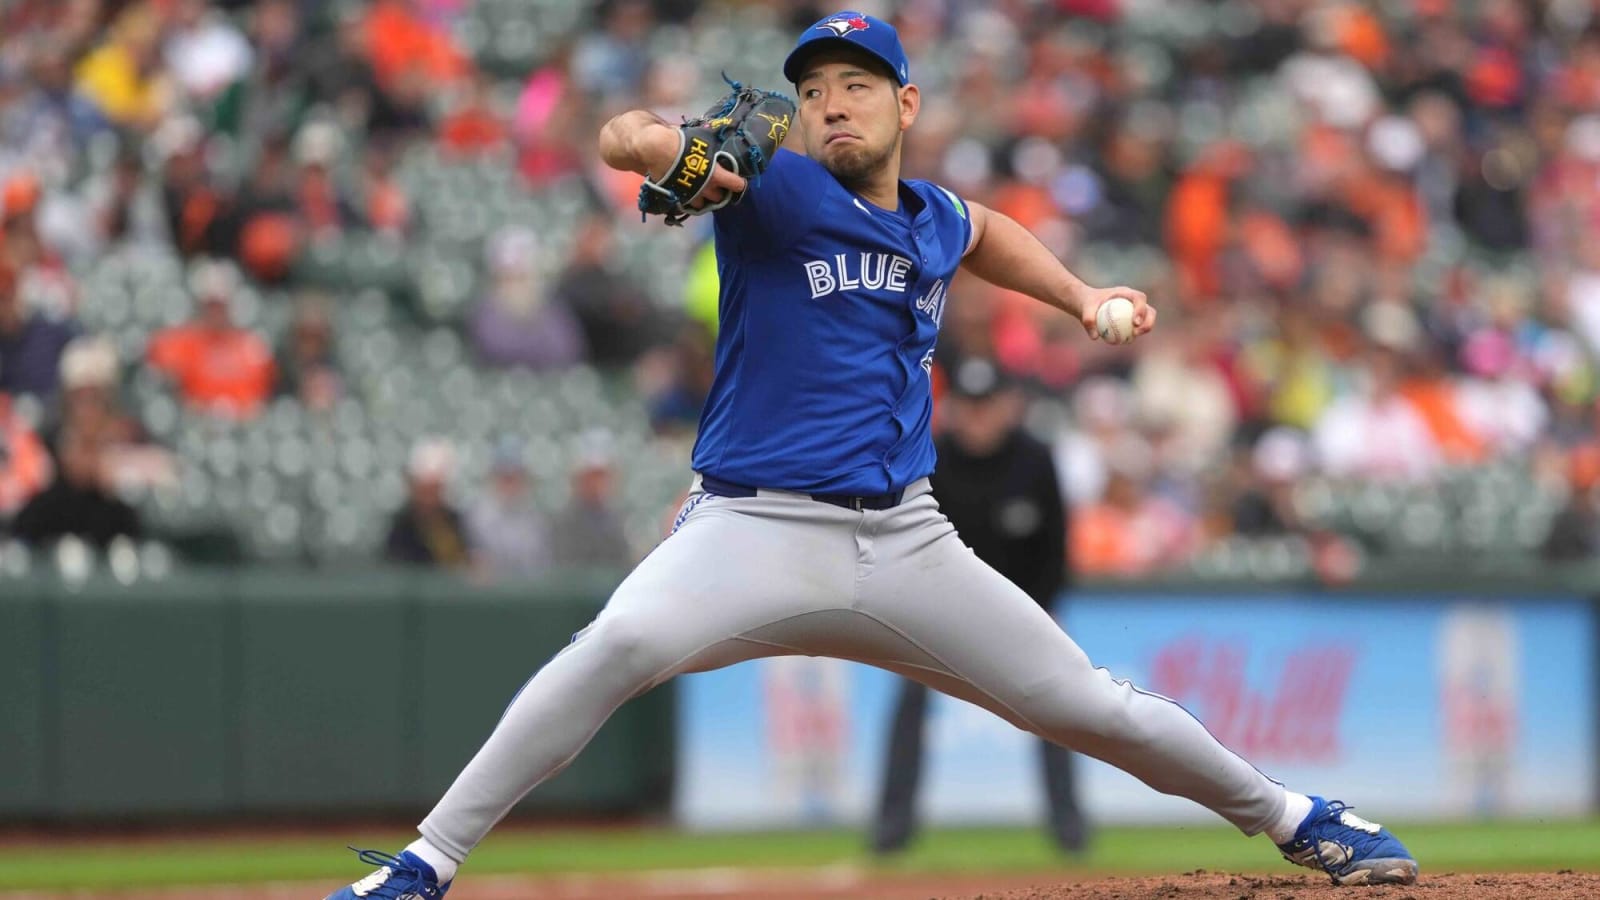 Blue Jays – Yusei Kikuchi continues to put up strong numbers in important contract year